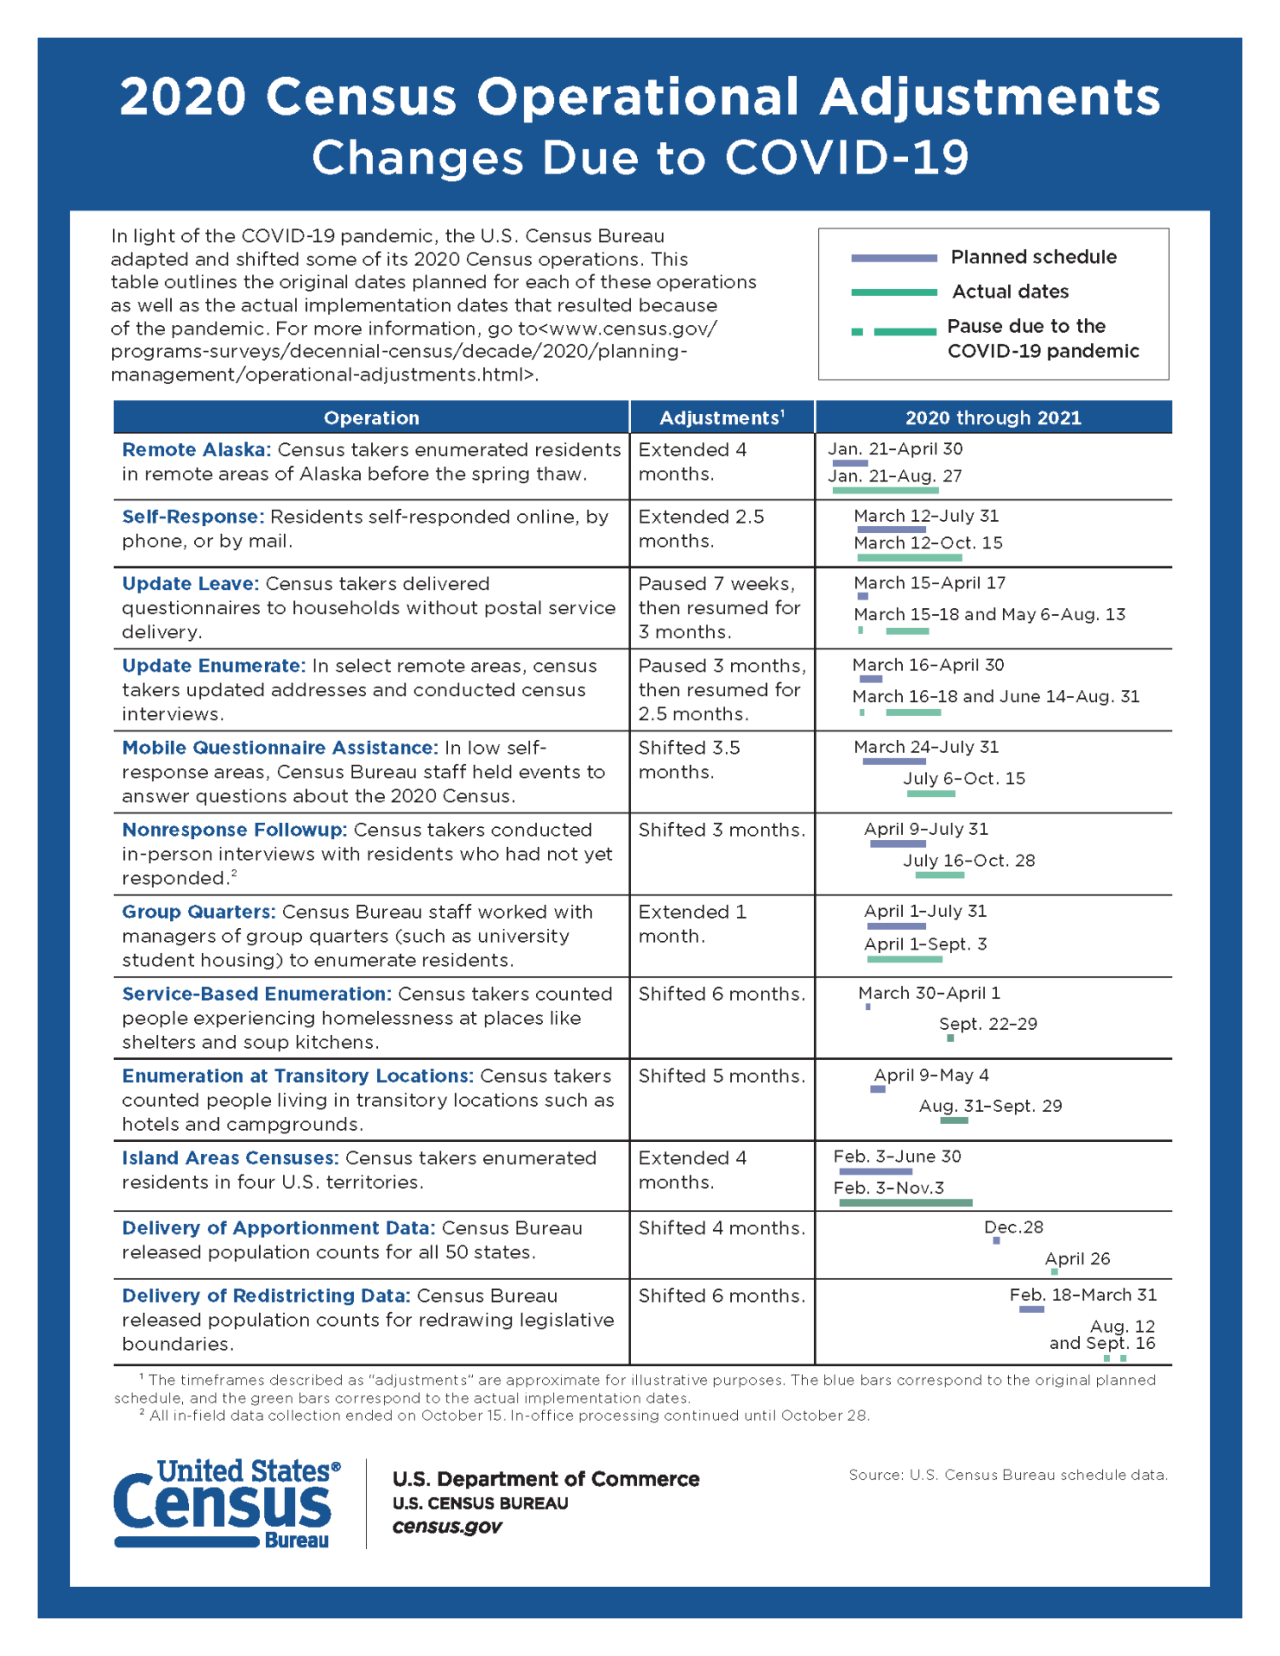 Fact sheet about 2020 Census Operational Adjustments Due to Covid-19